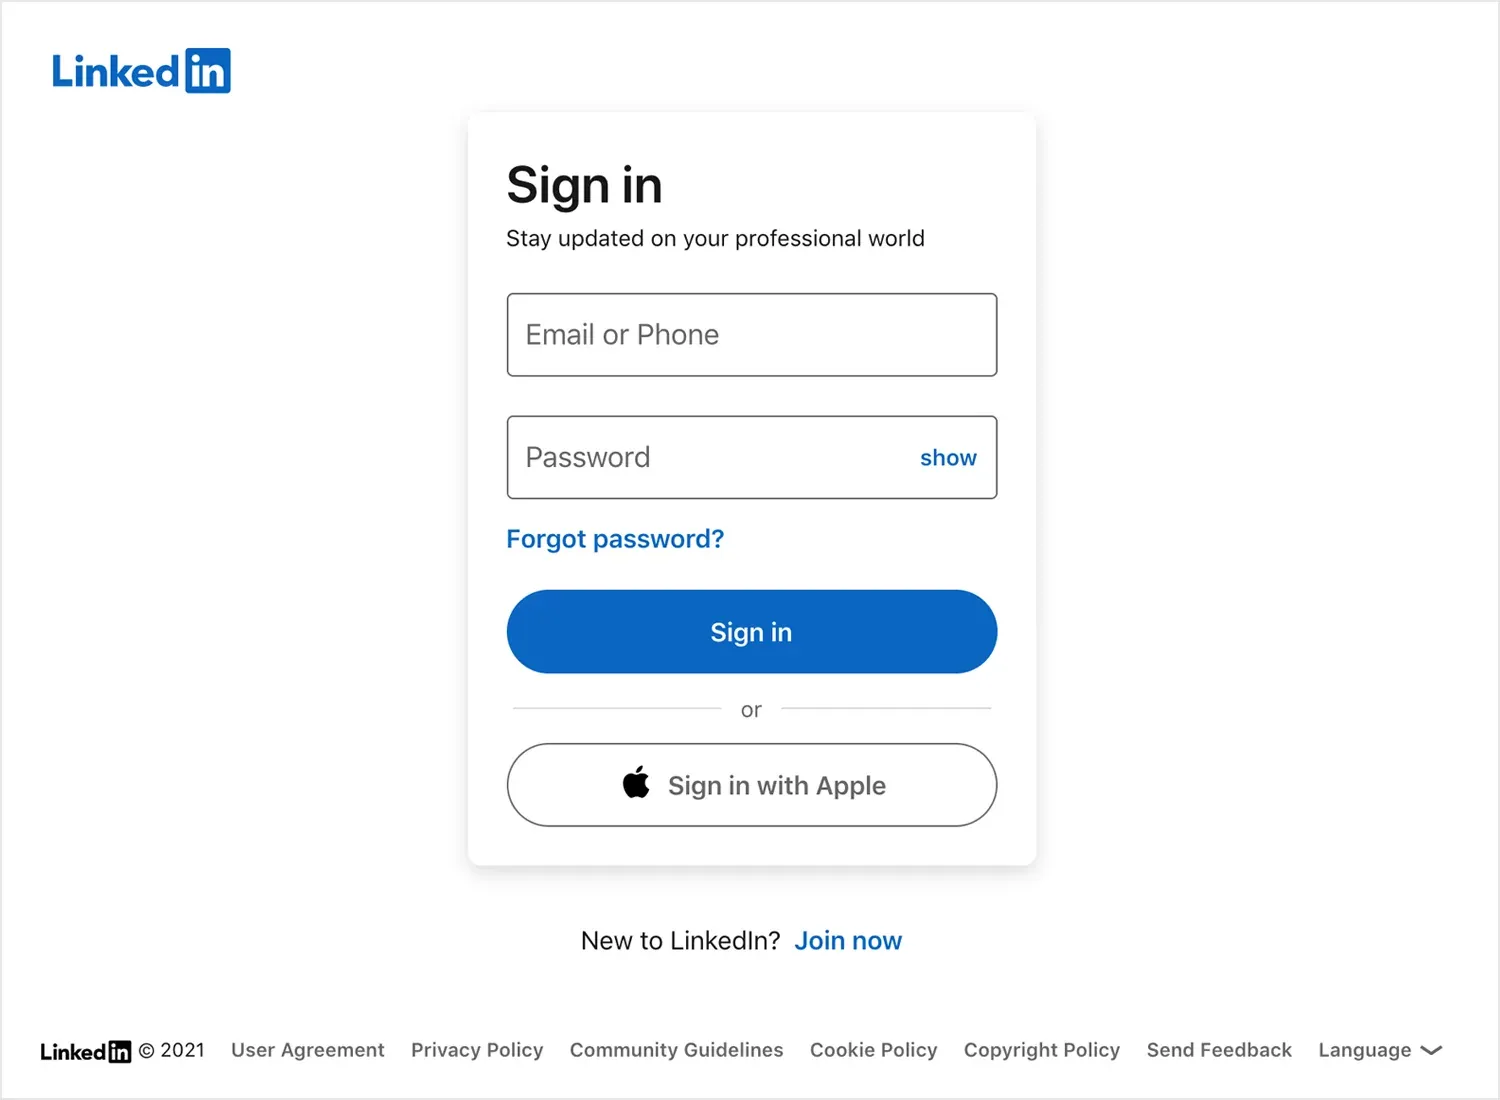 10 tips for a better login page and process - UXM